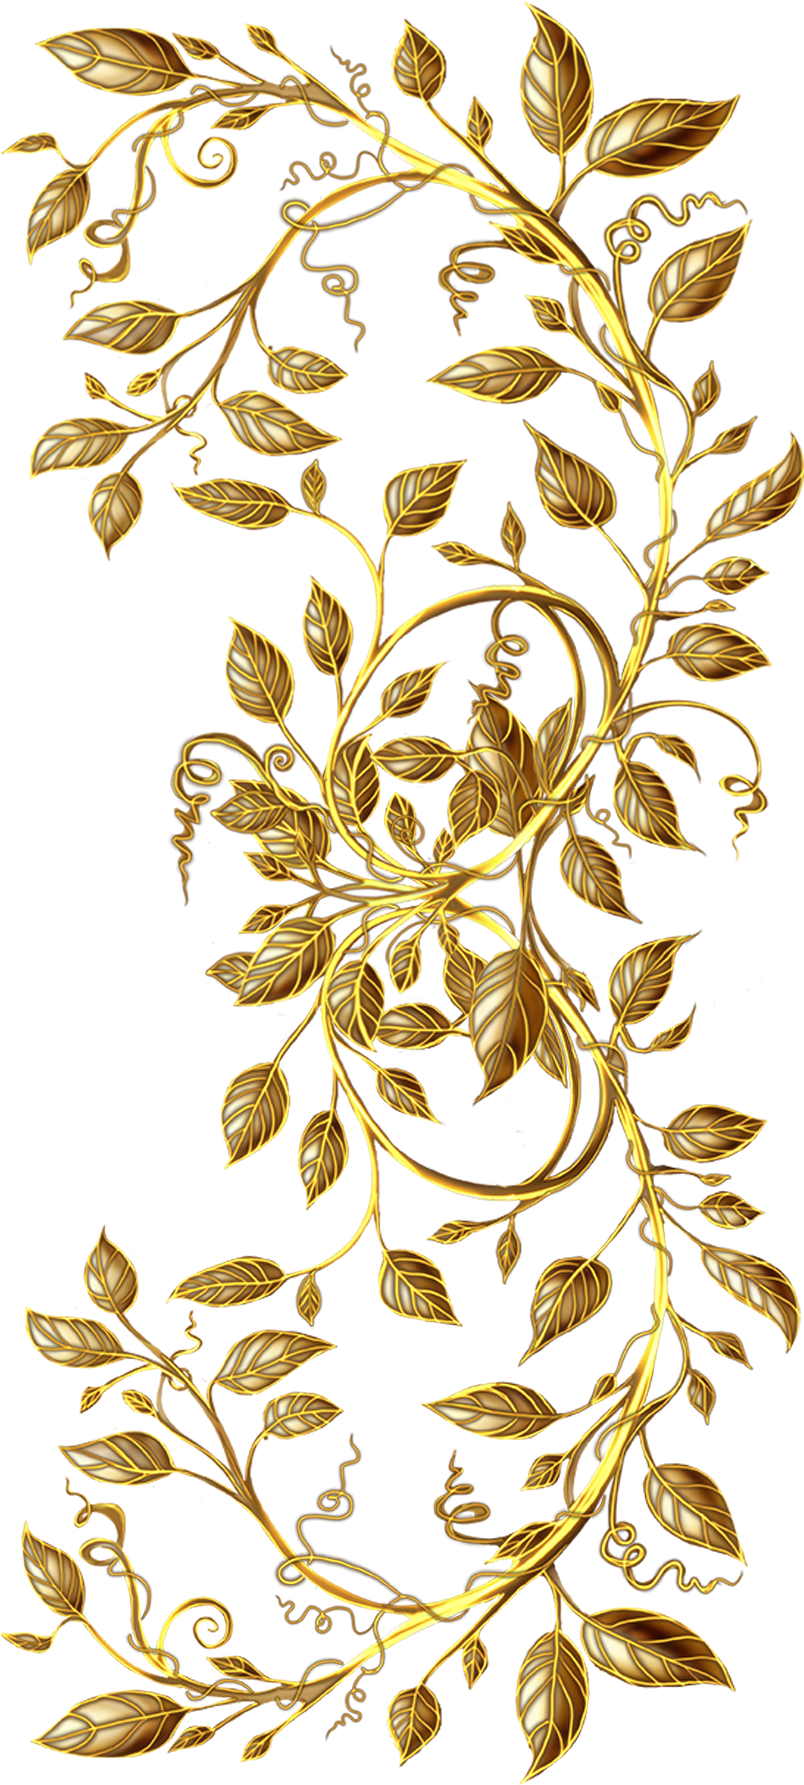 Gold vines with gold leaves